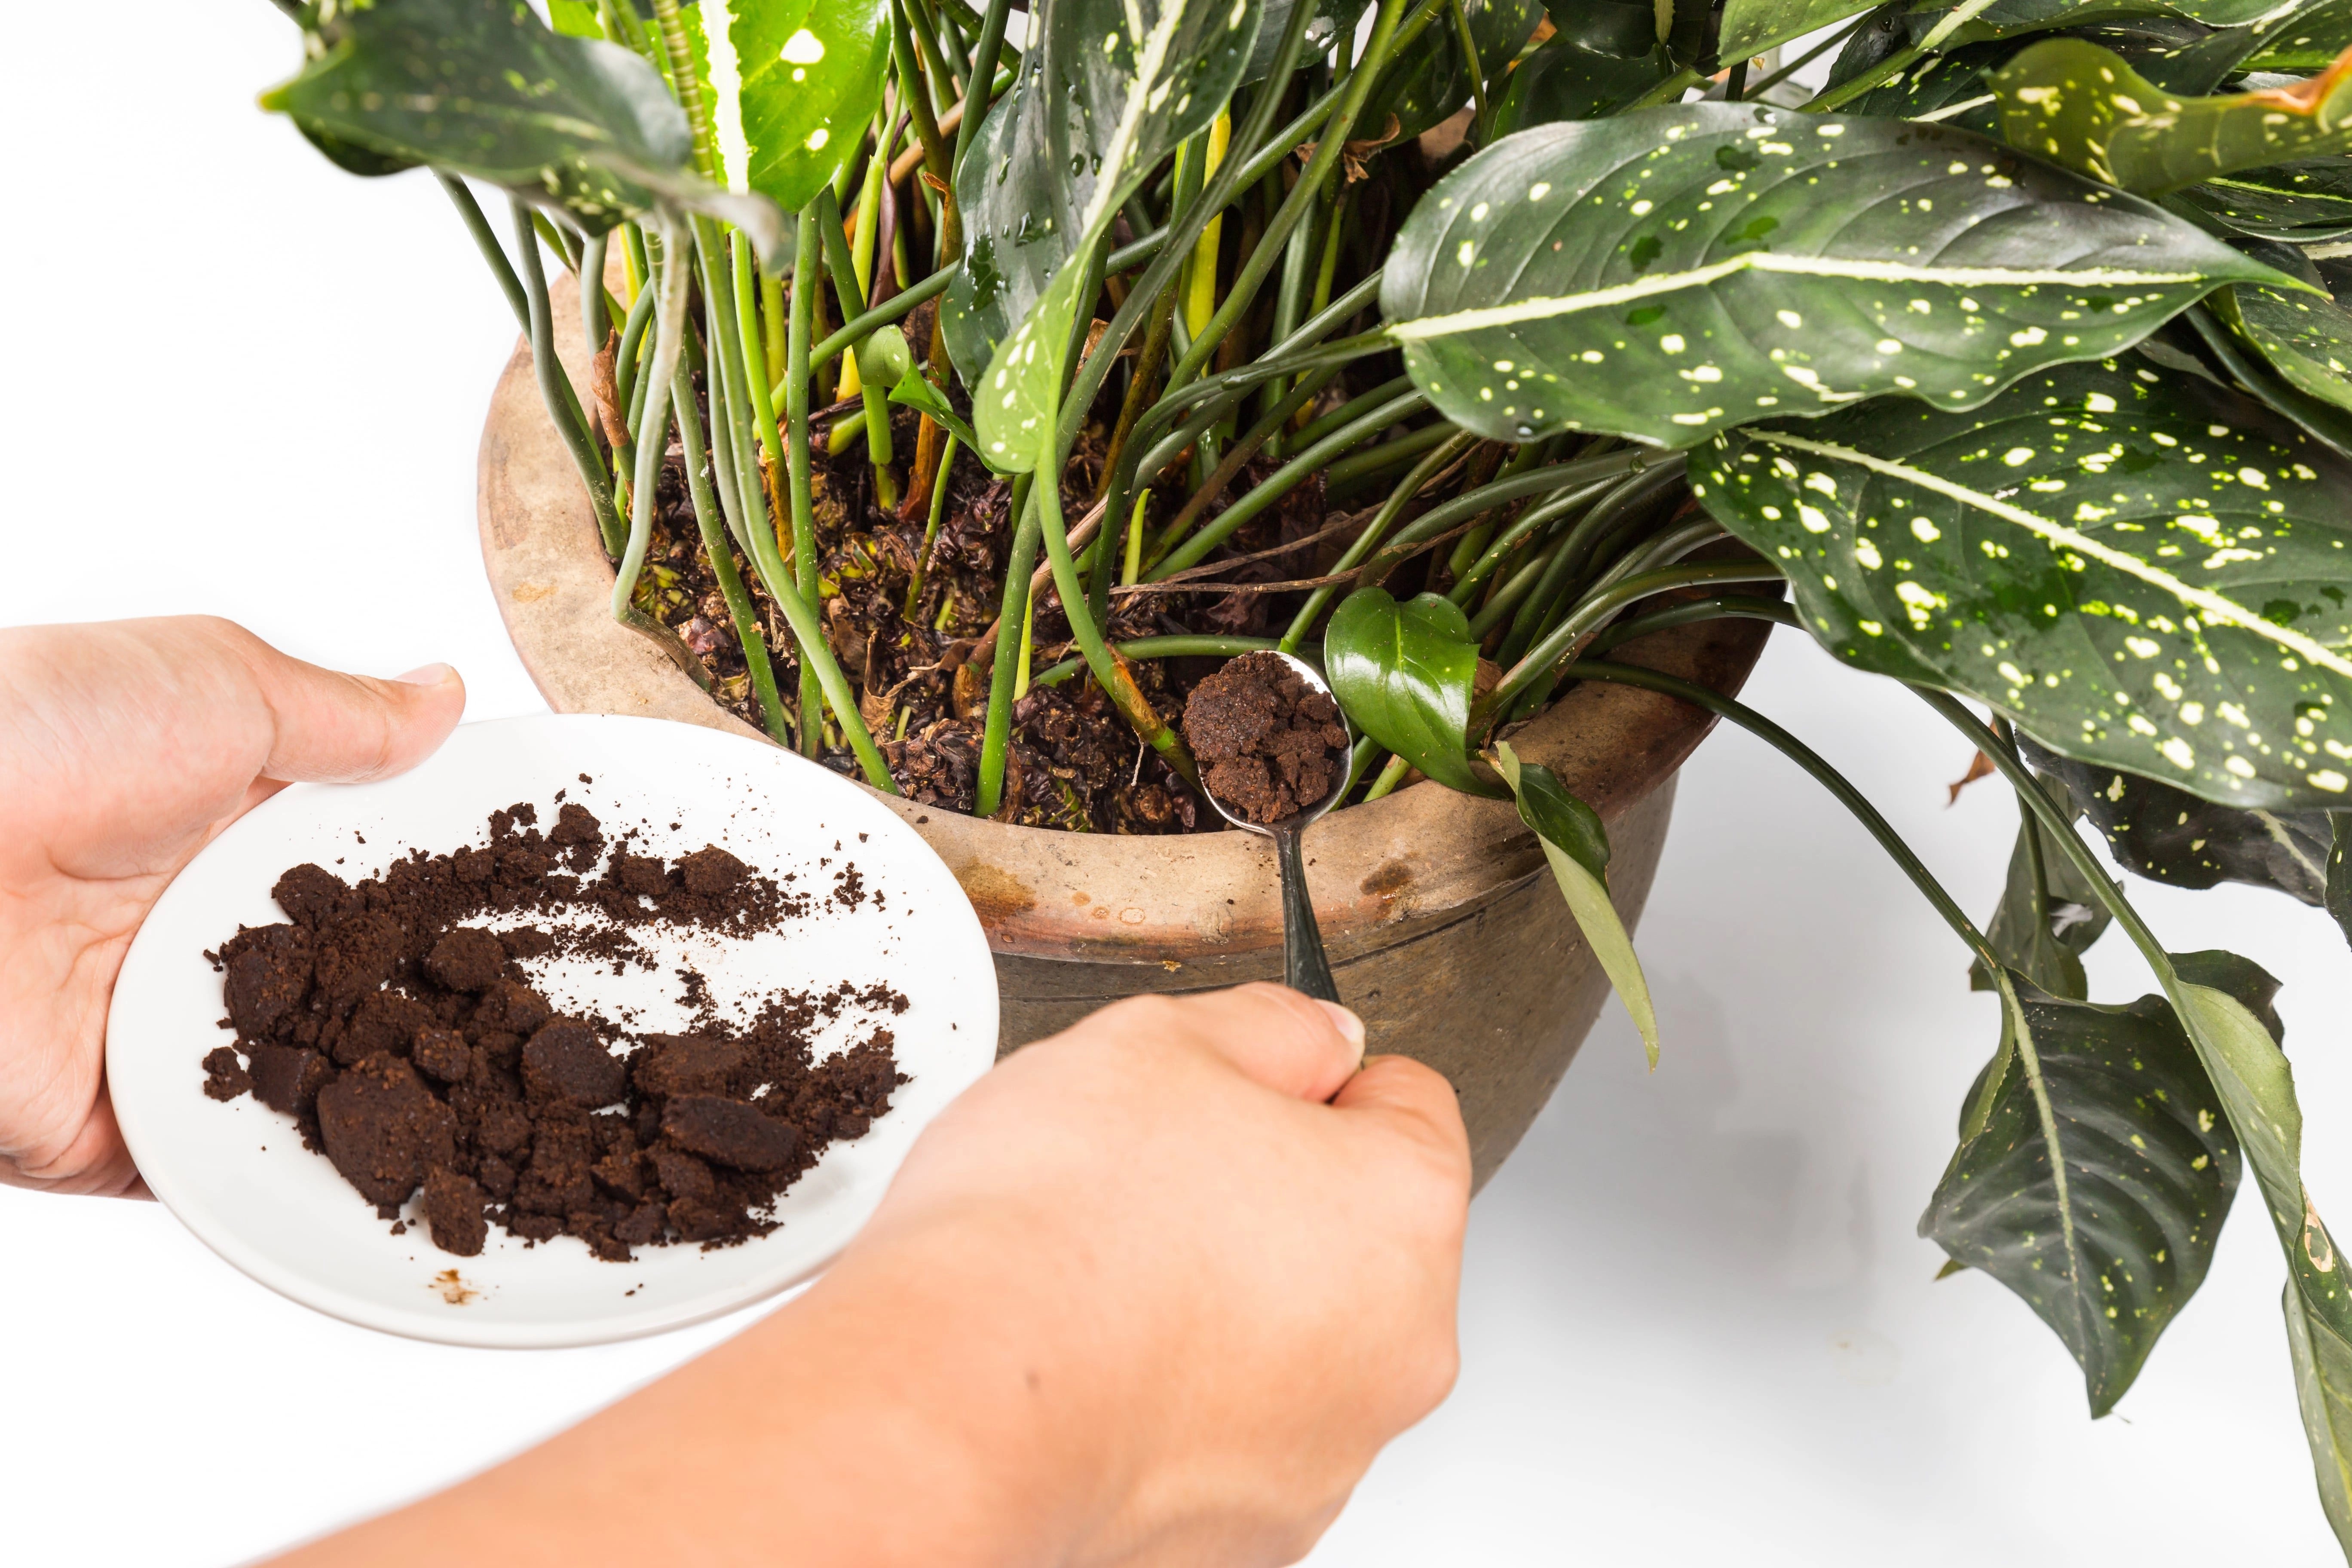 How To Apply Fertilizer To Plants